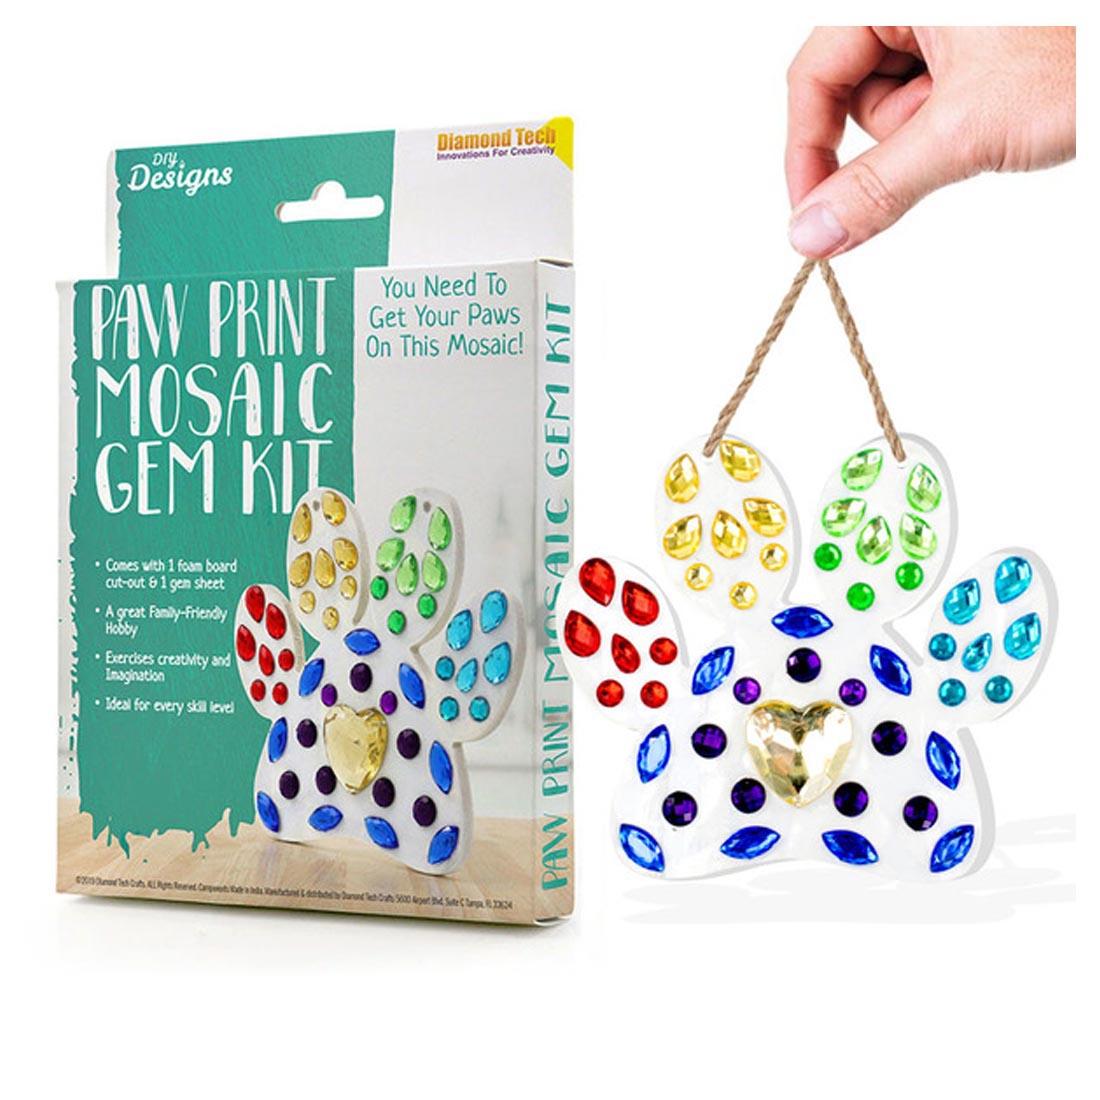 Paw Print Mosaic Gem Kit Package Shown Beside a Completed Paw Print hanging from a string